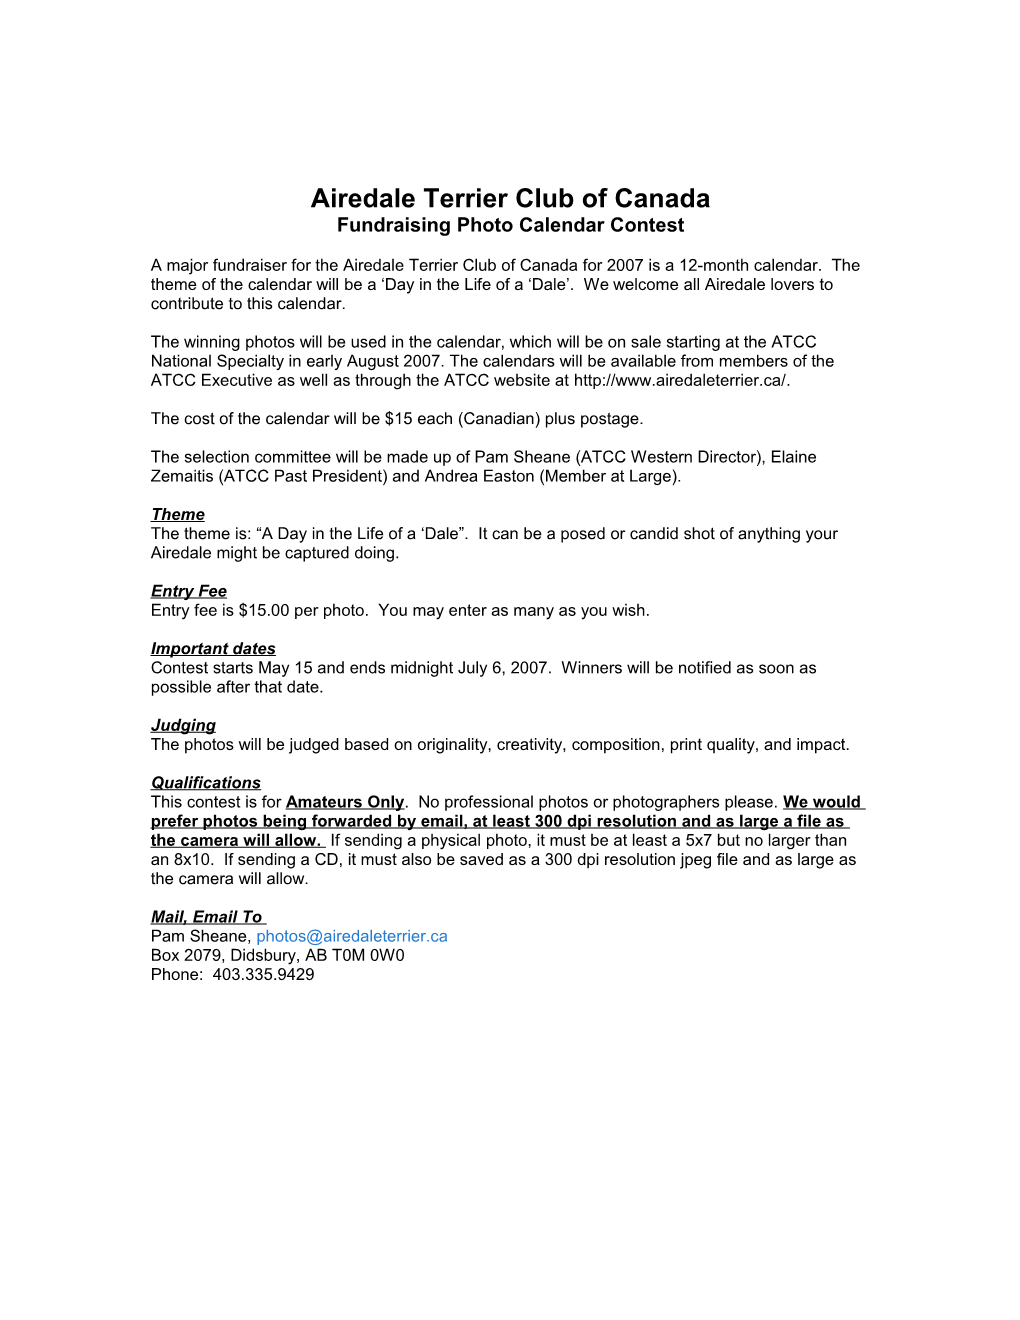 Airedale Terrier Club of Canada - Photo Contest Entry Form